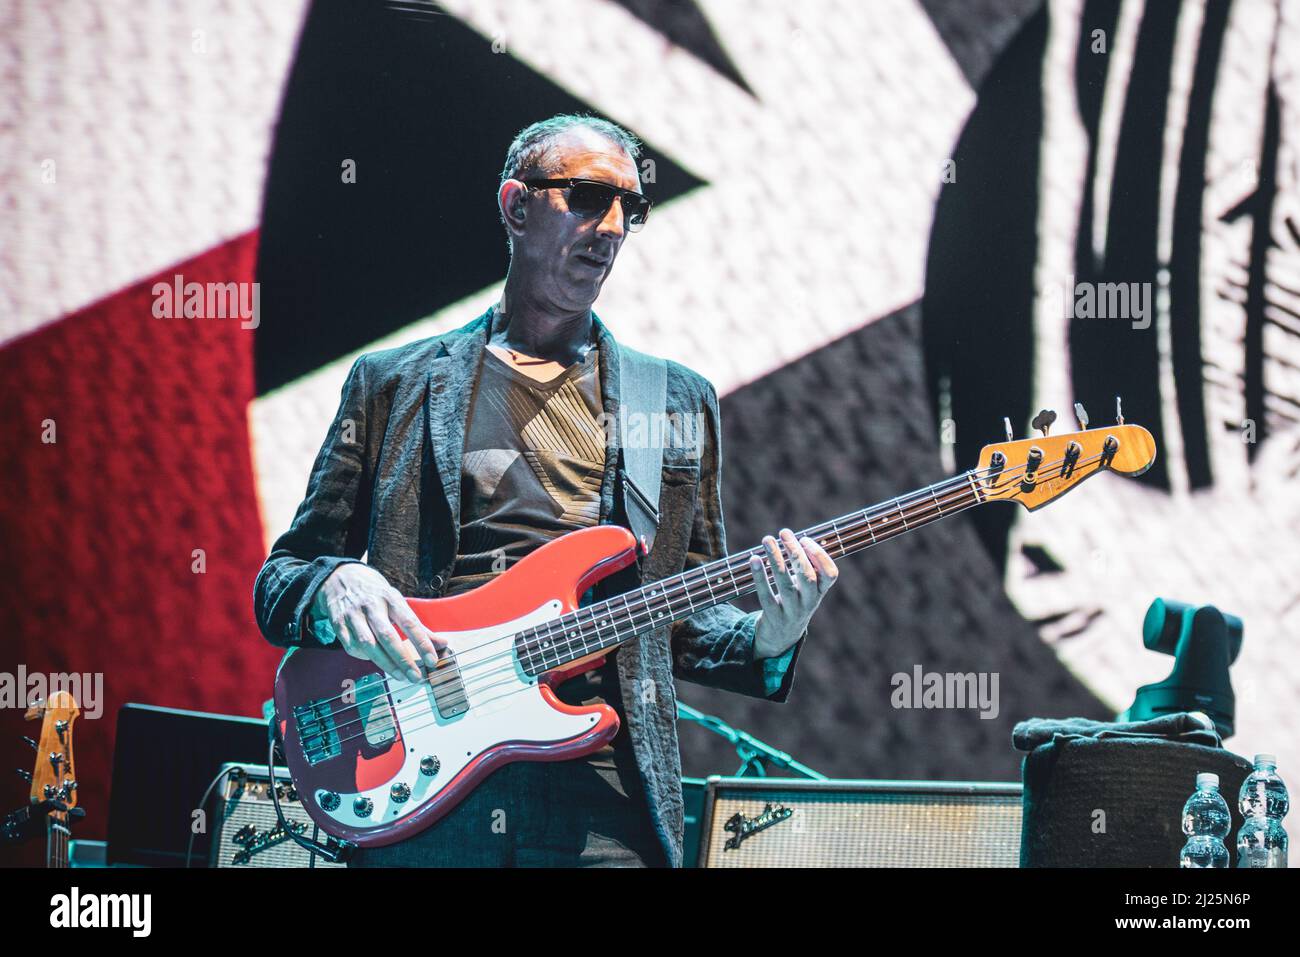 ITALY, BOLOGNA, UNIPOL ARENA 2016: Pino Palladino, bassist of the British rock band “The Who”, performing live on stage for the “Back to the Who” European tour Stock Photo